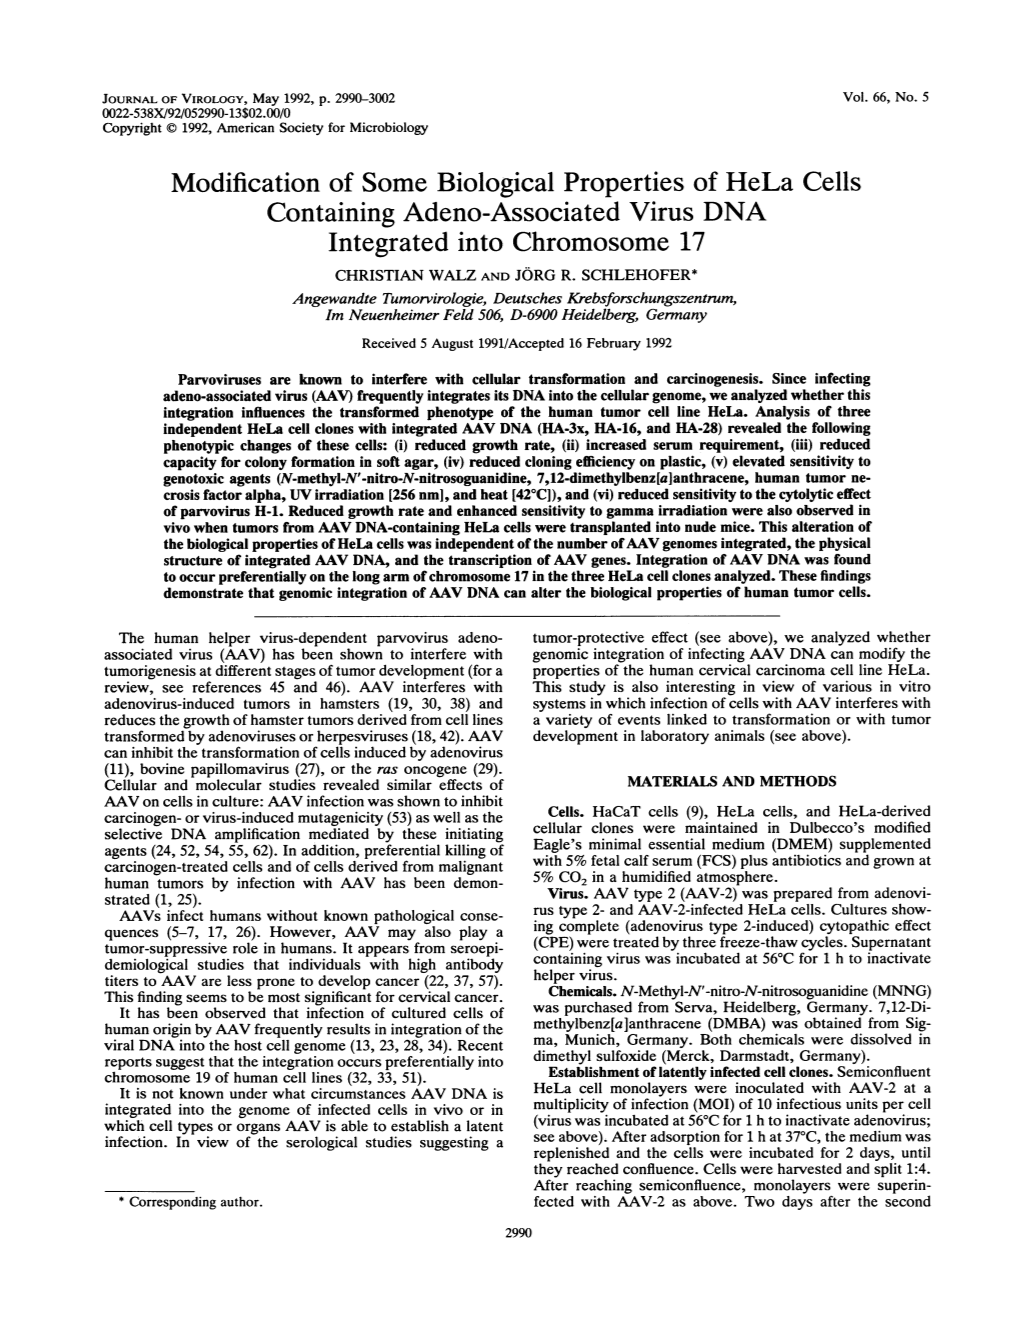 Modification of Some Biological Properties of Hela Cells Containing Adeno-Associated Virus DNA Integrated Into Chromosome 17 CHRISTIAN WALZ and JORG R